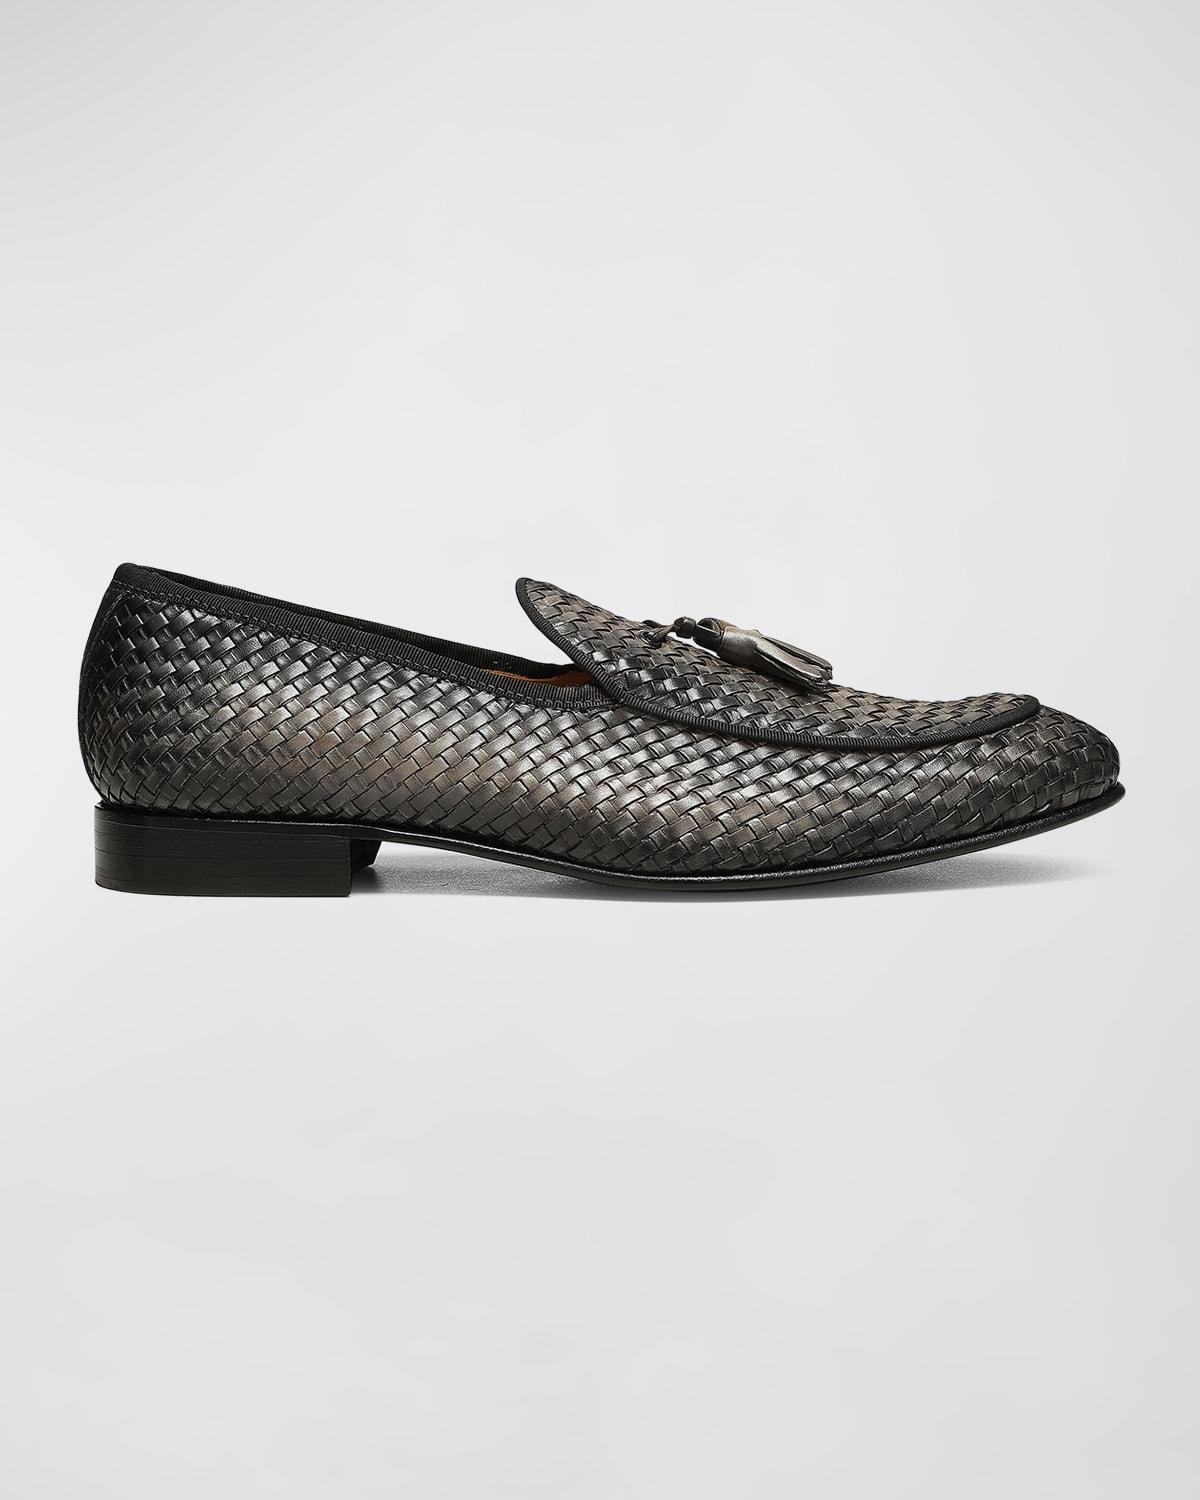 Mens COLLECTION Patent Velvet Loafers Product Image